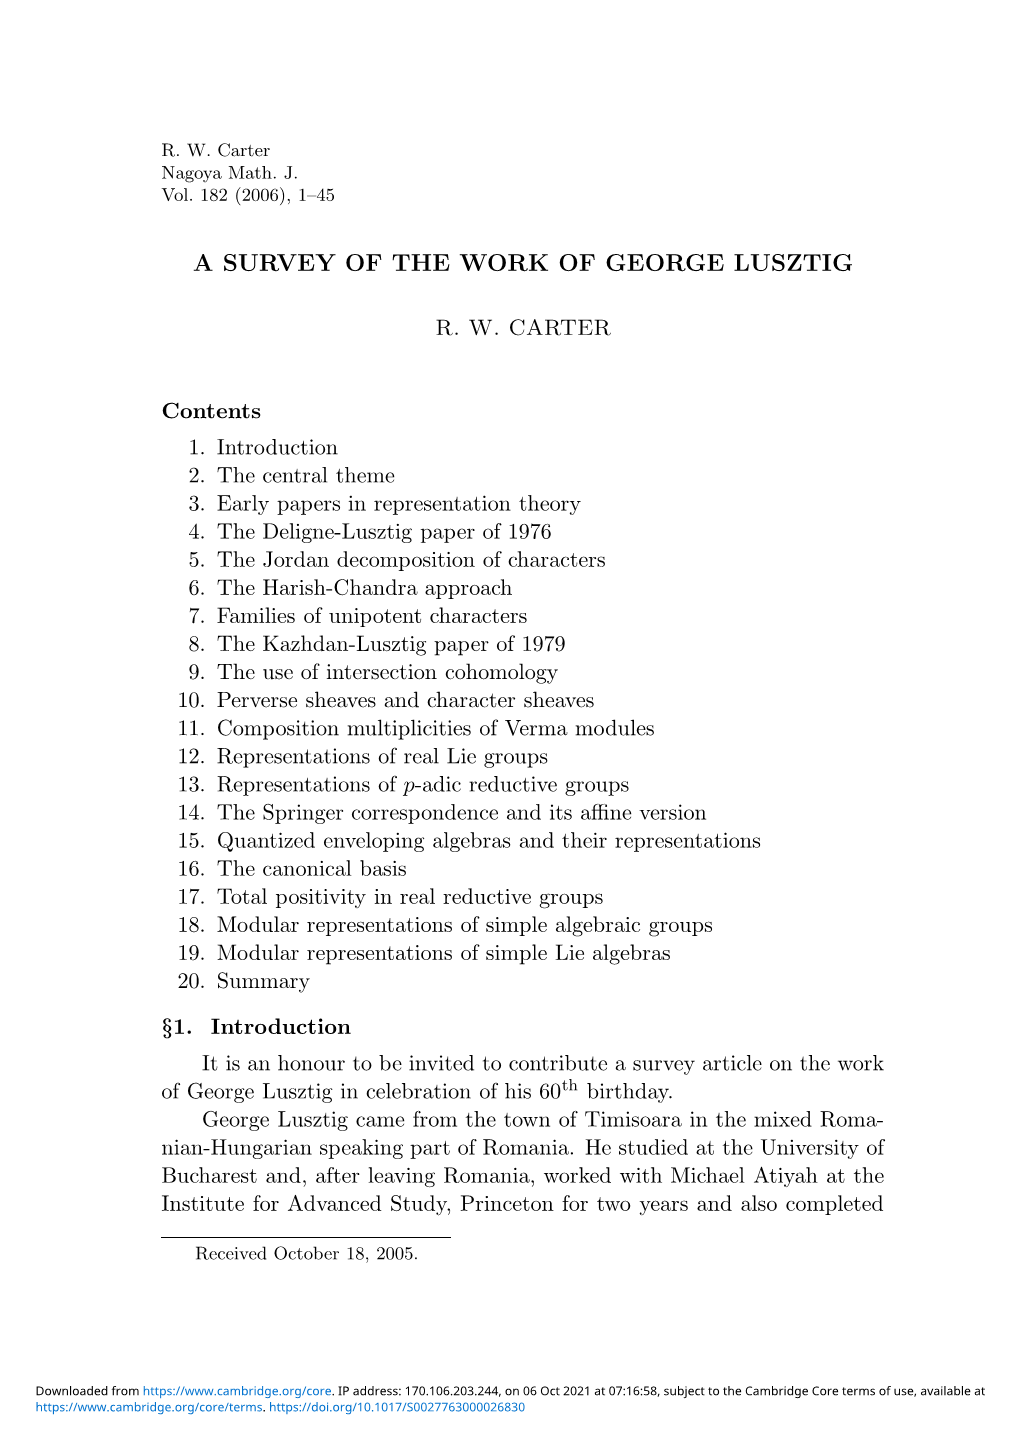 A Survey of the Work of George Lusztig